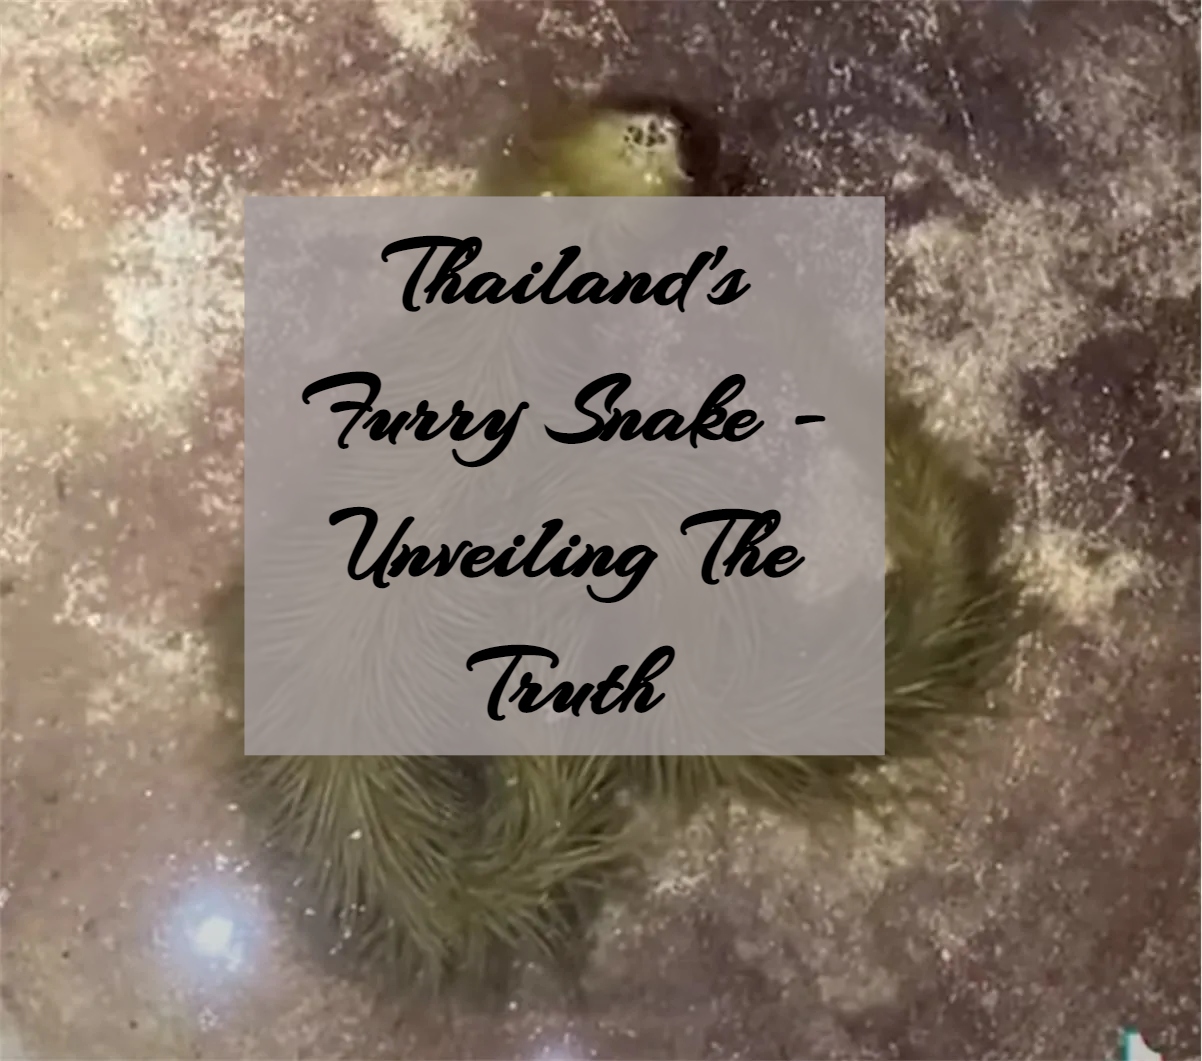 Thailand's Furry Snake - Unveiling The Truth